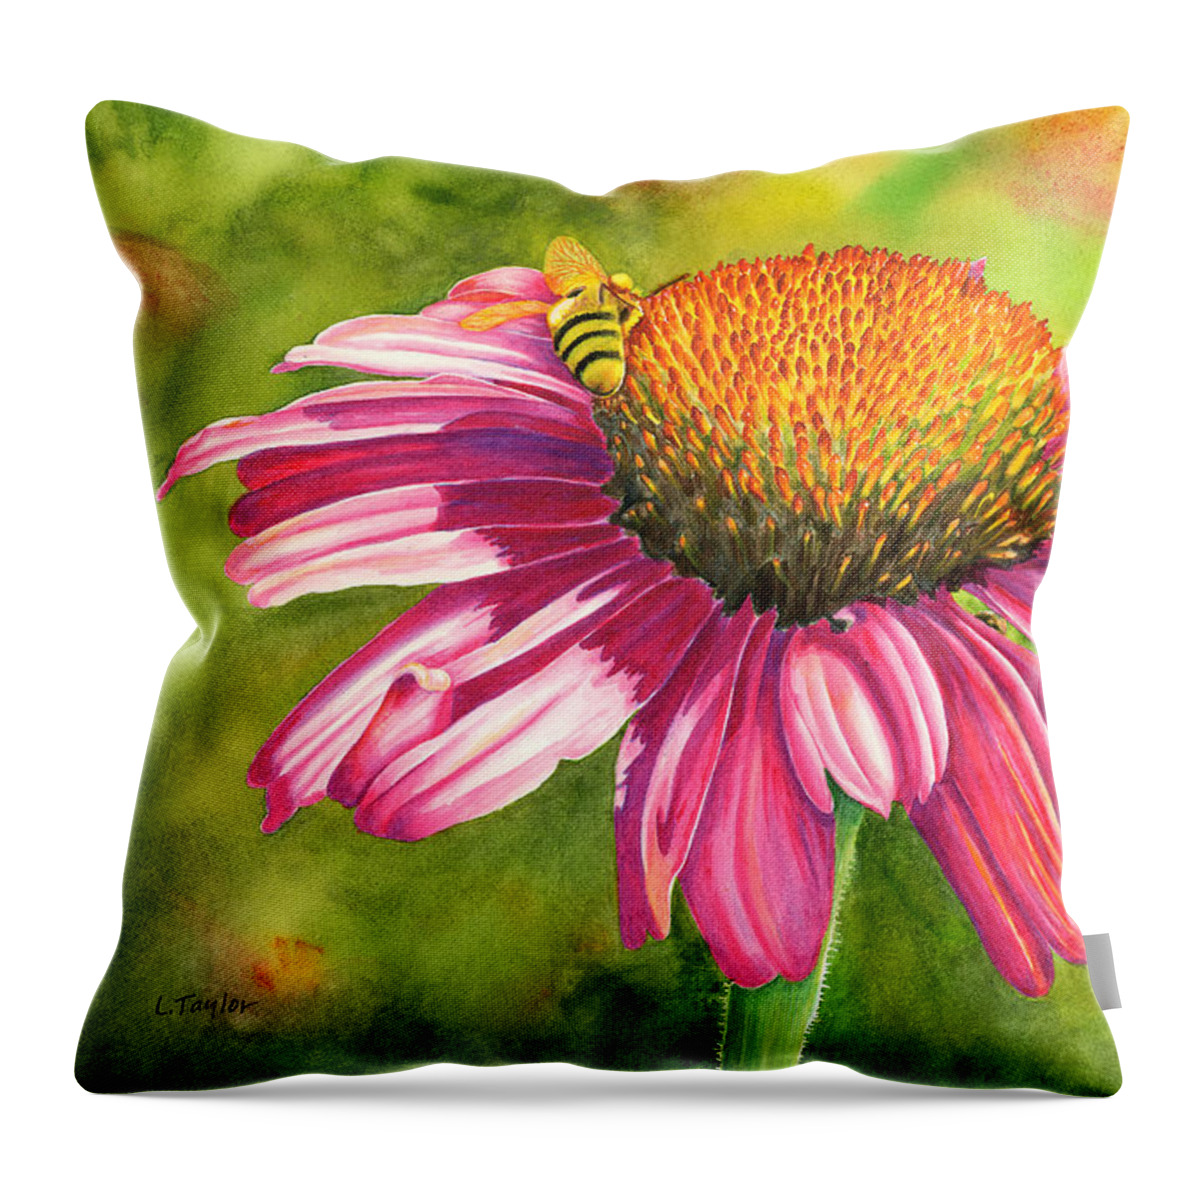 Large Floral Throw Pillow featuring the painting Drawn In by Lori Taylor